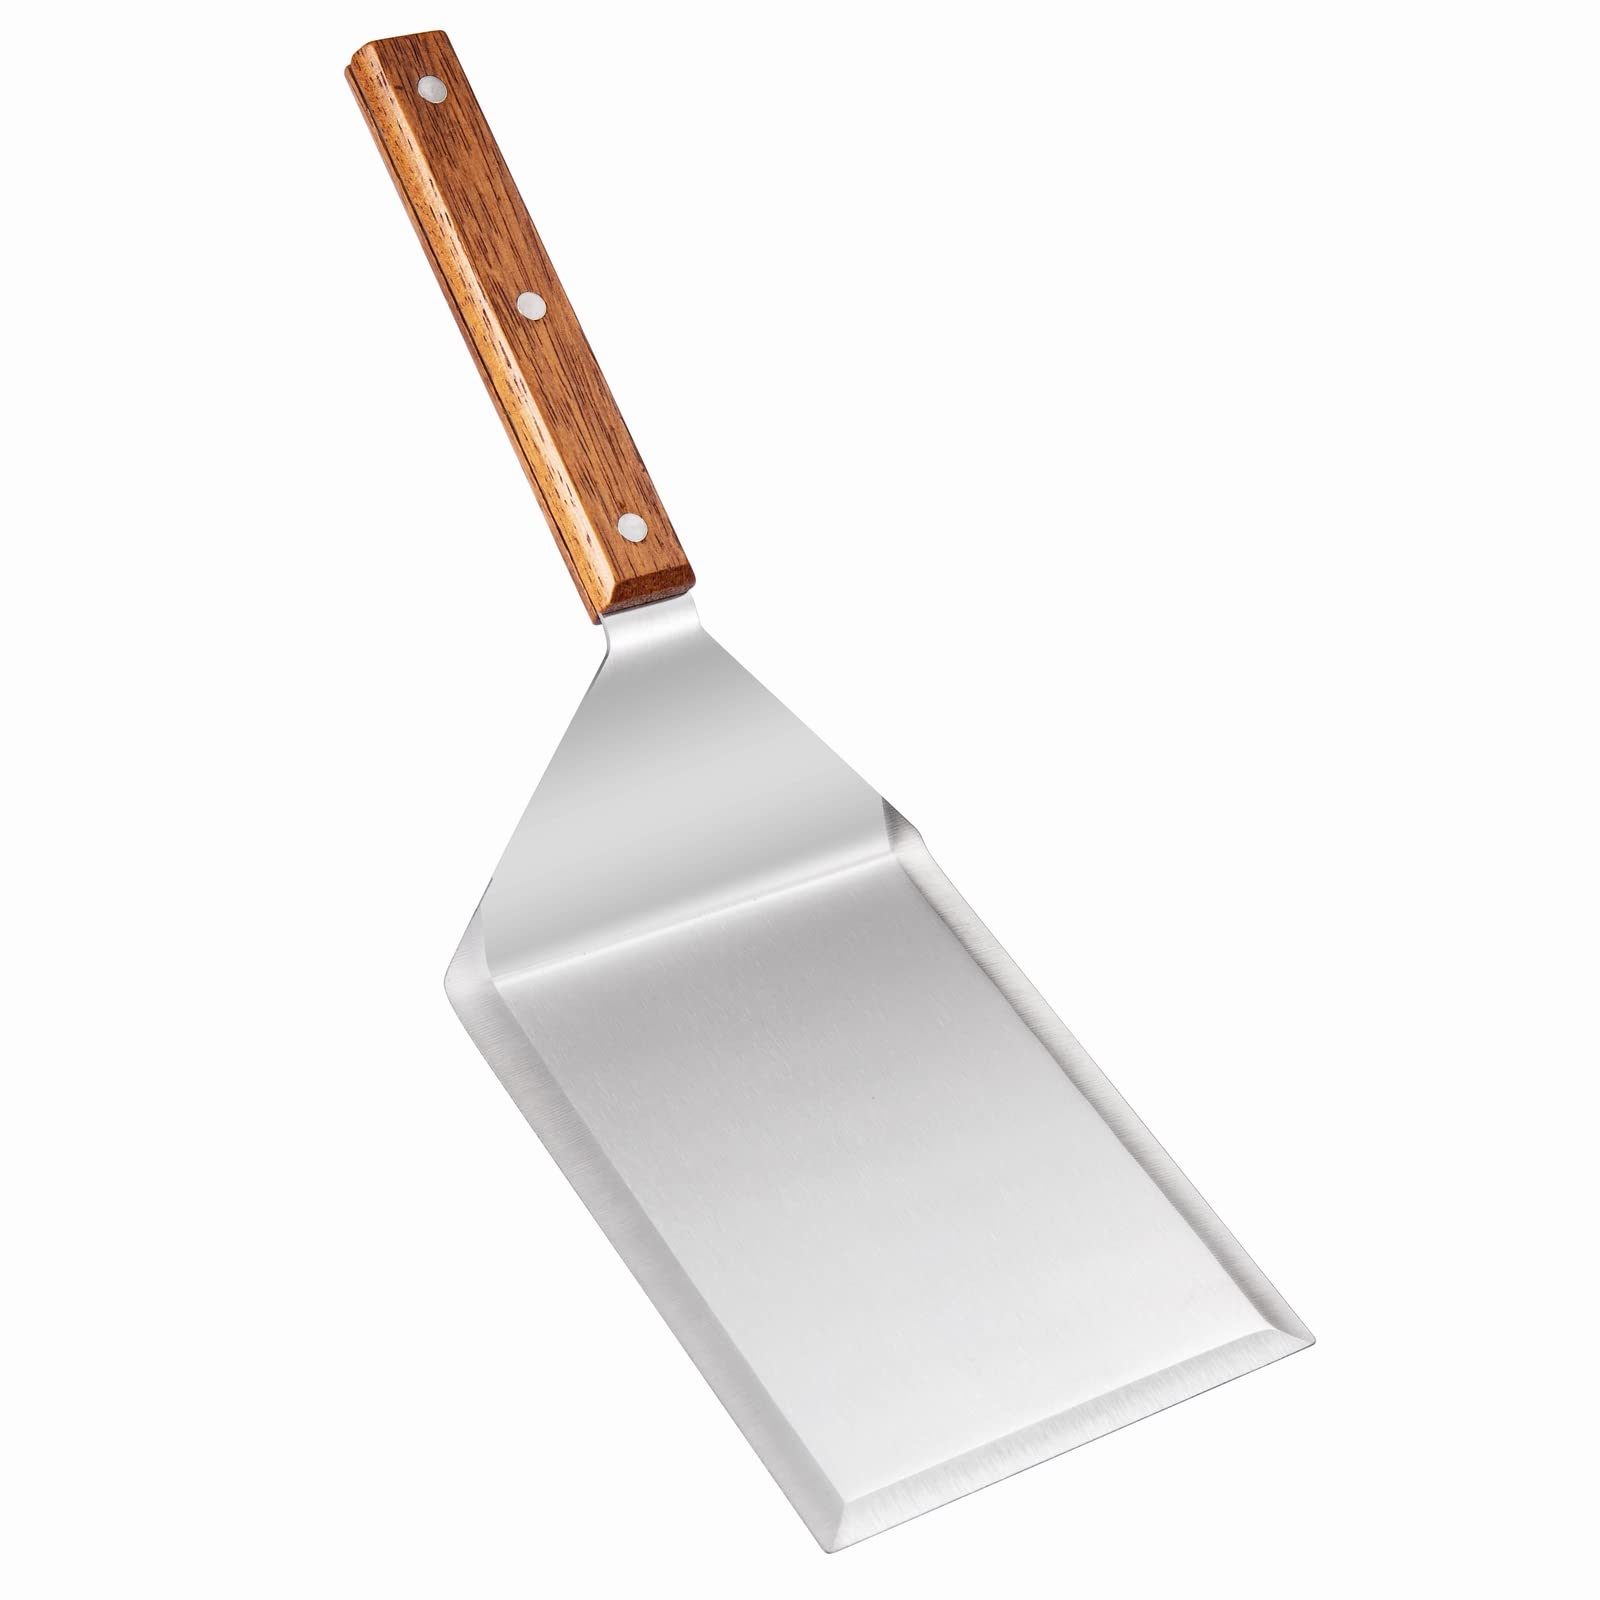 Homi Styles Extra Wide Spatula with Beveled Edges, Oversized Stainless –  Homistyles